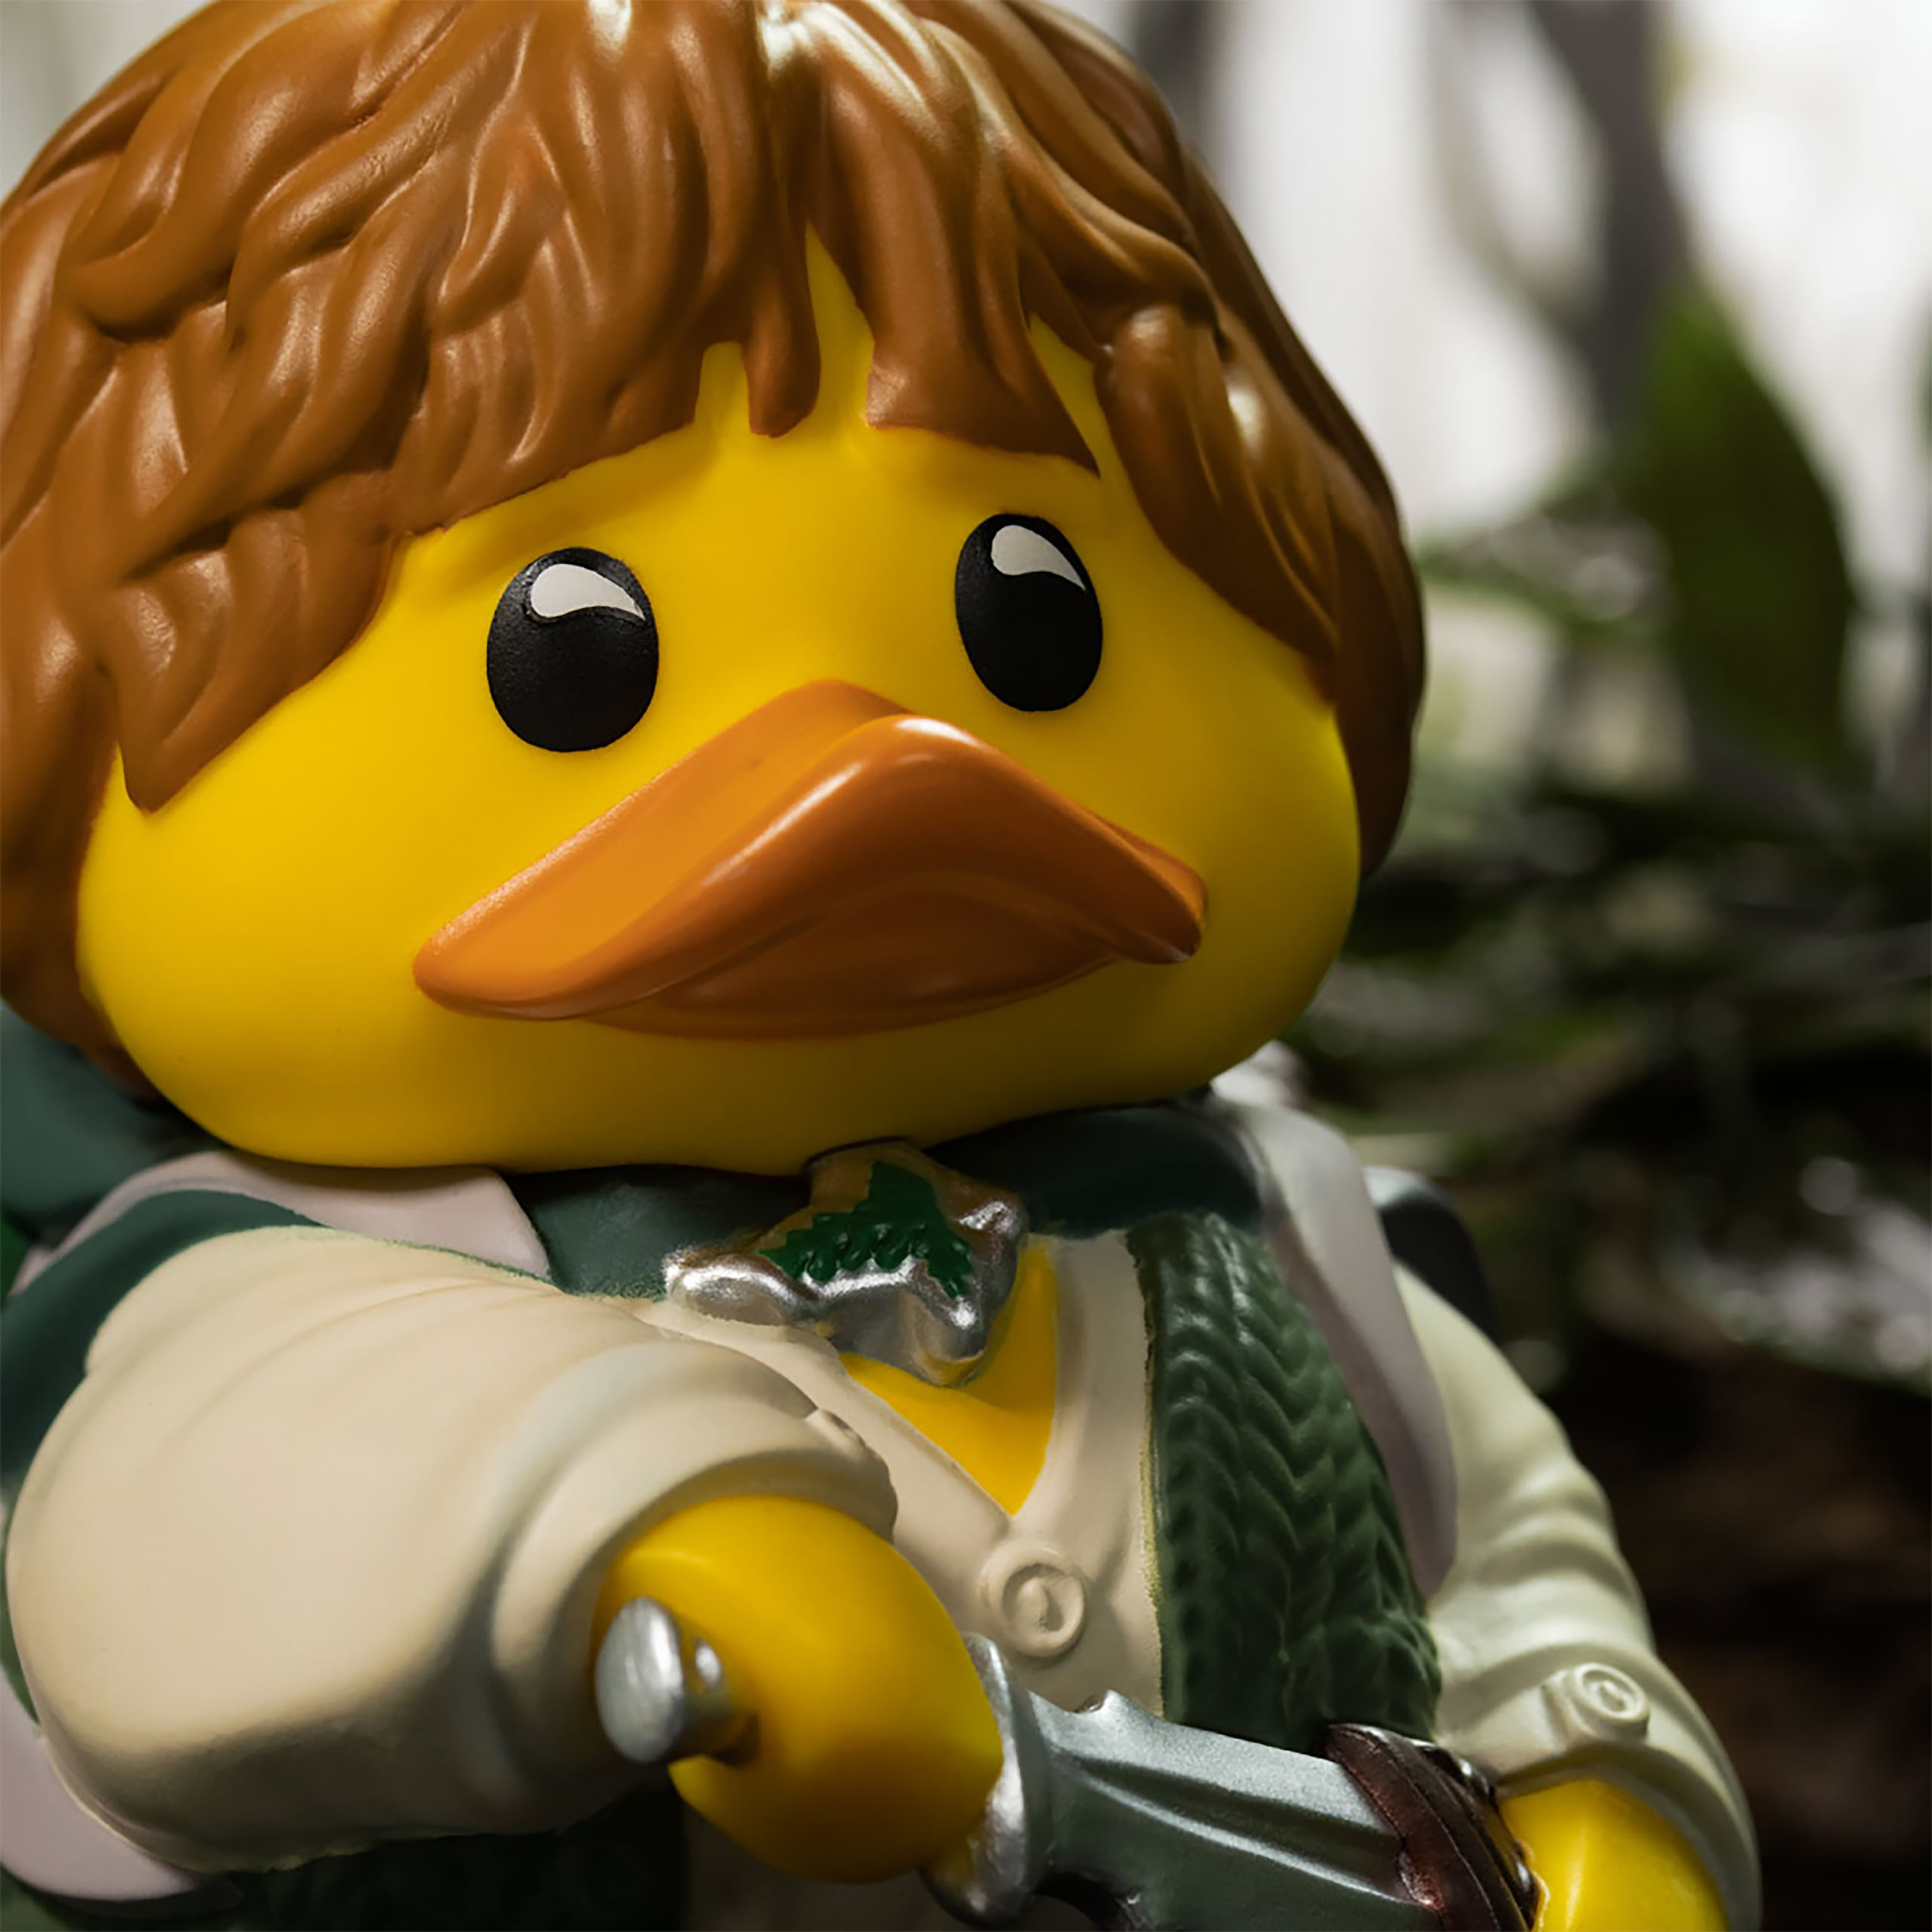 Lord of the Rings - Samwise Gamgee TUBBZ Decorative Duck